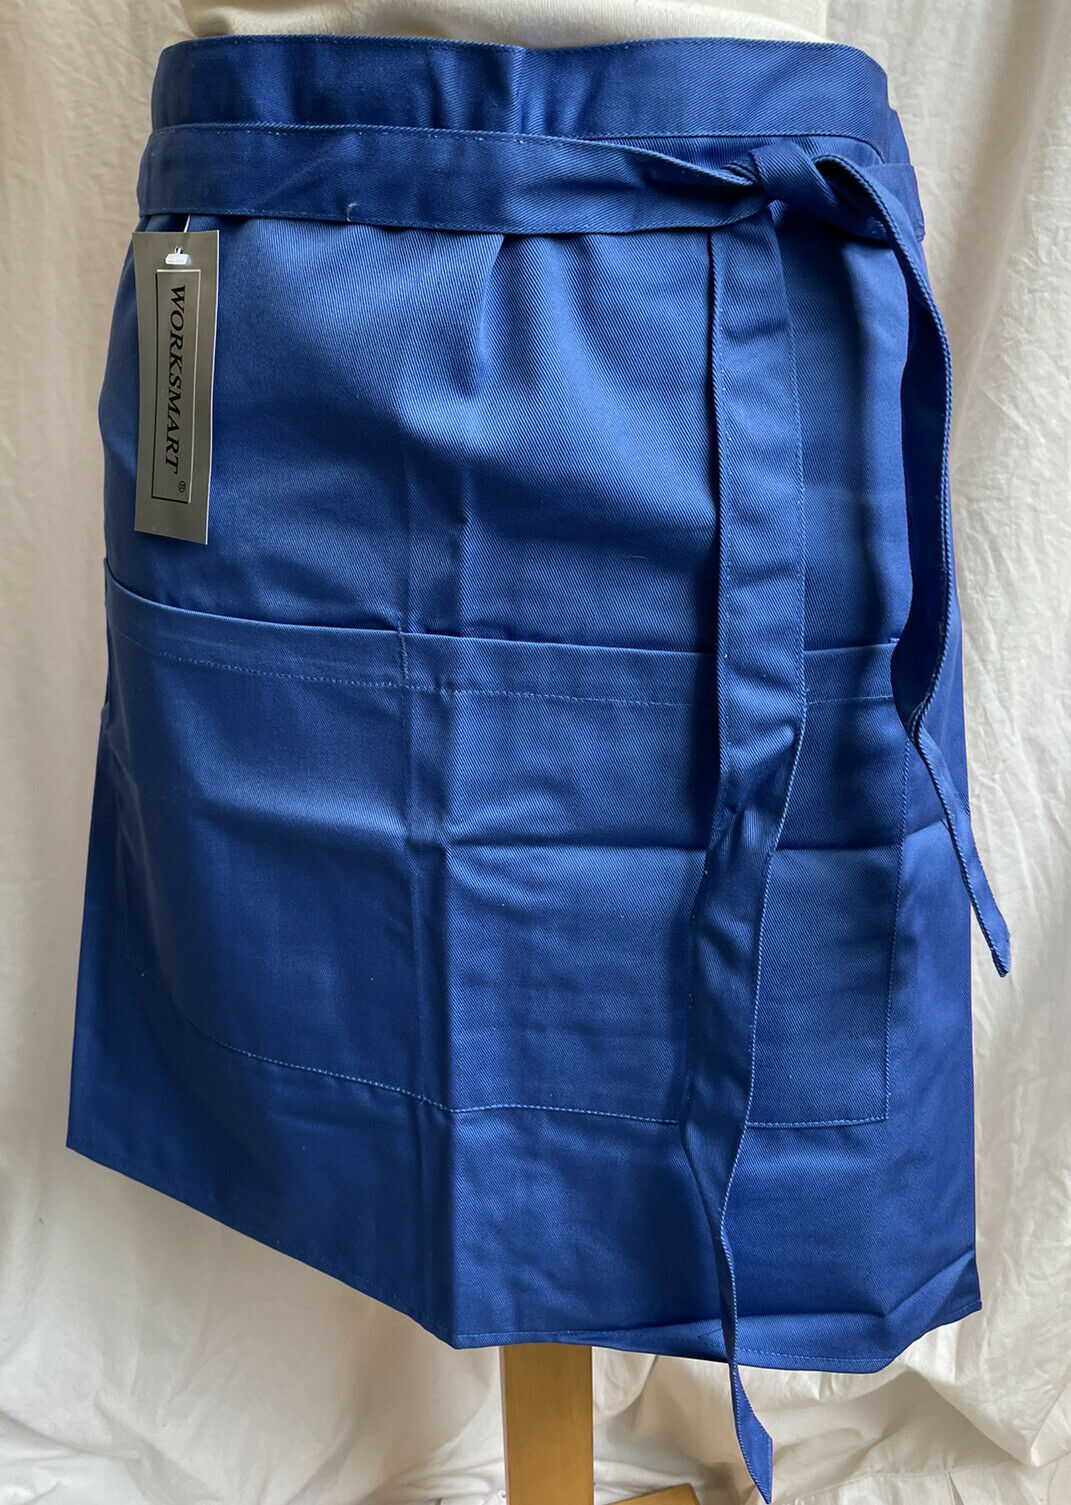 Lot of 34 x 'Worksmart' Short Aprons 3 Colours, One Size with pocket